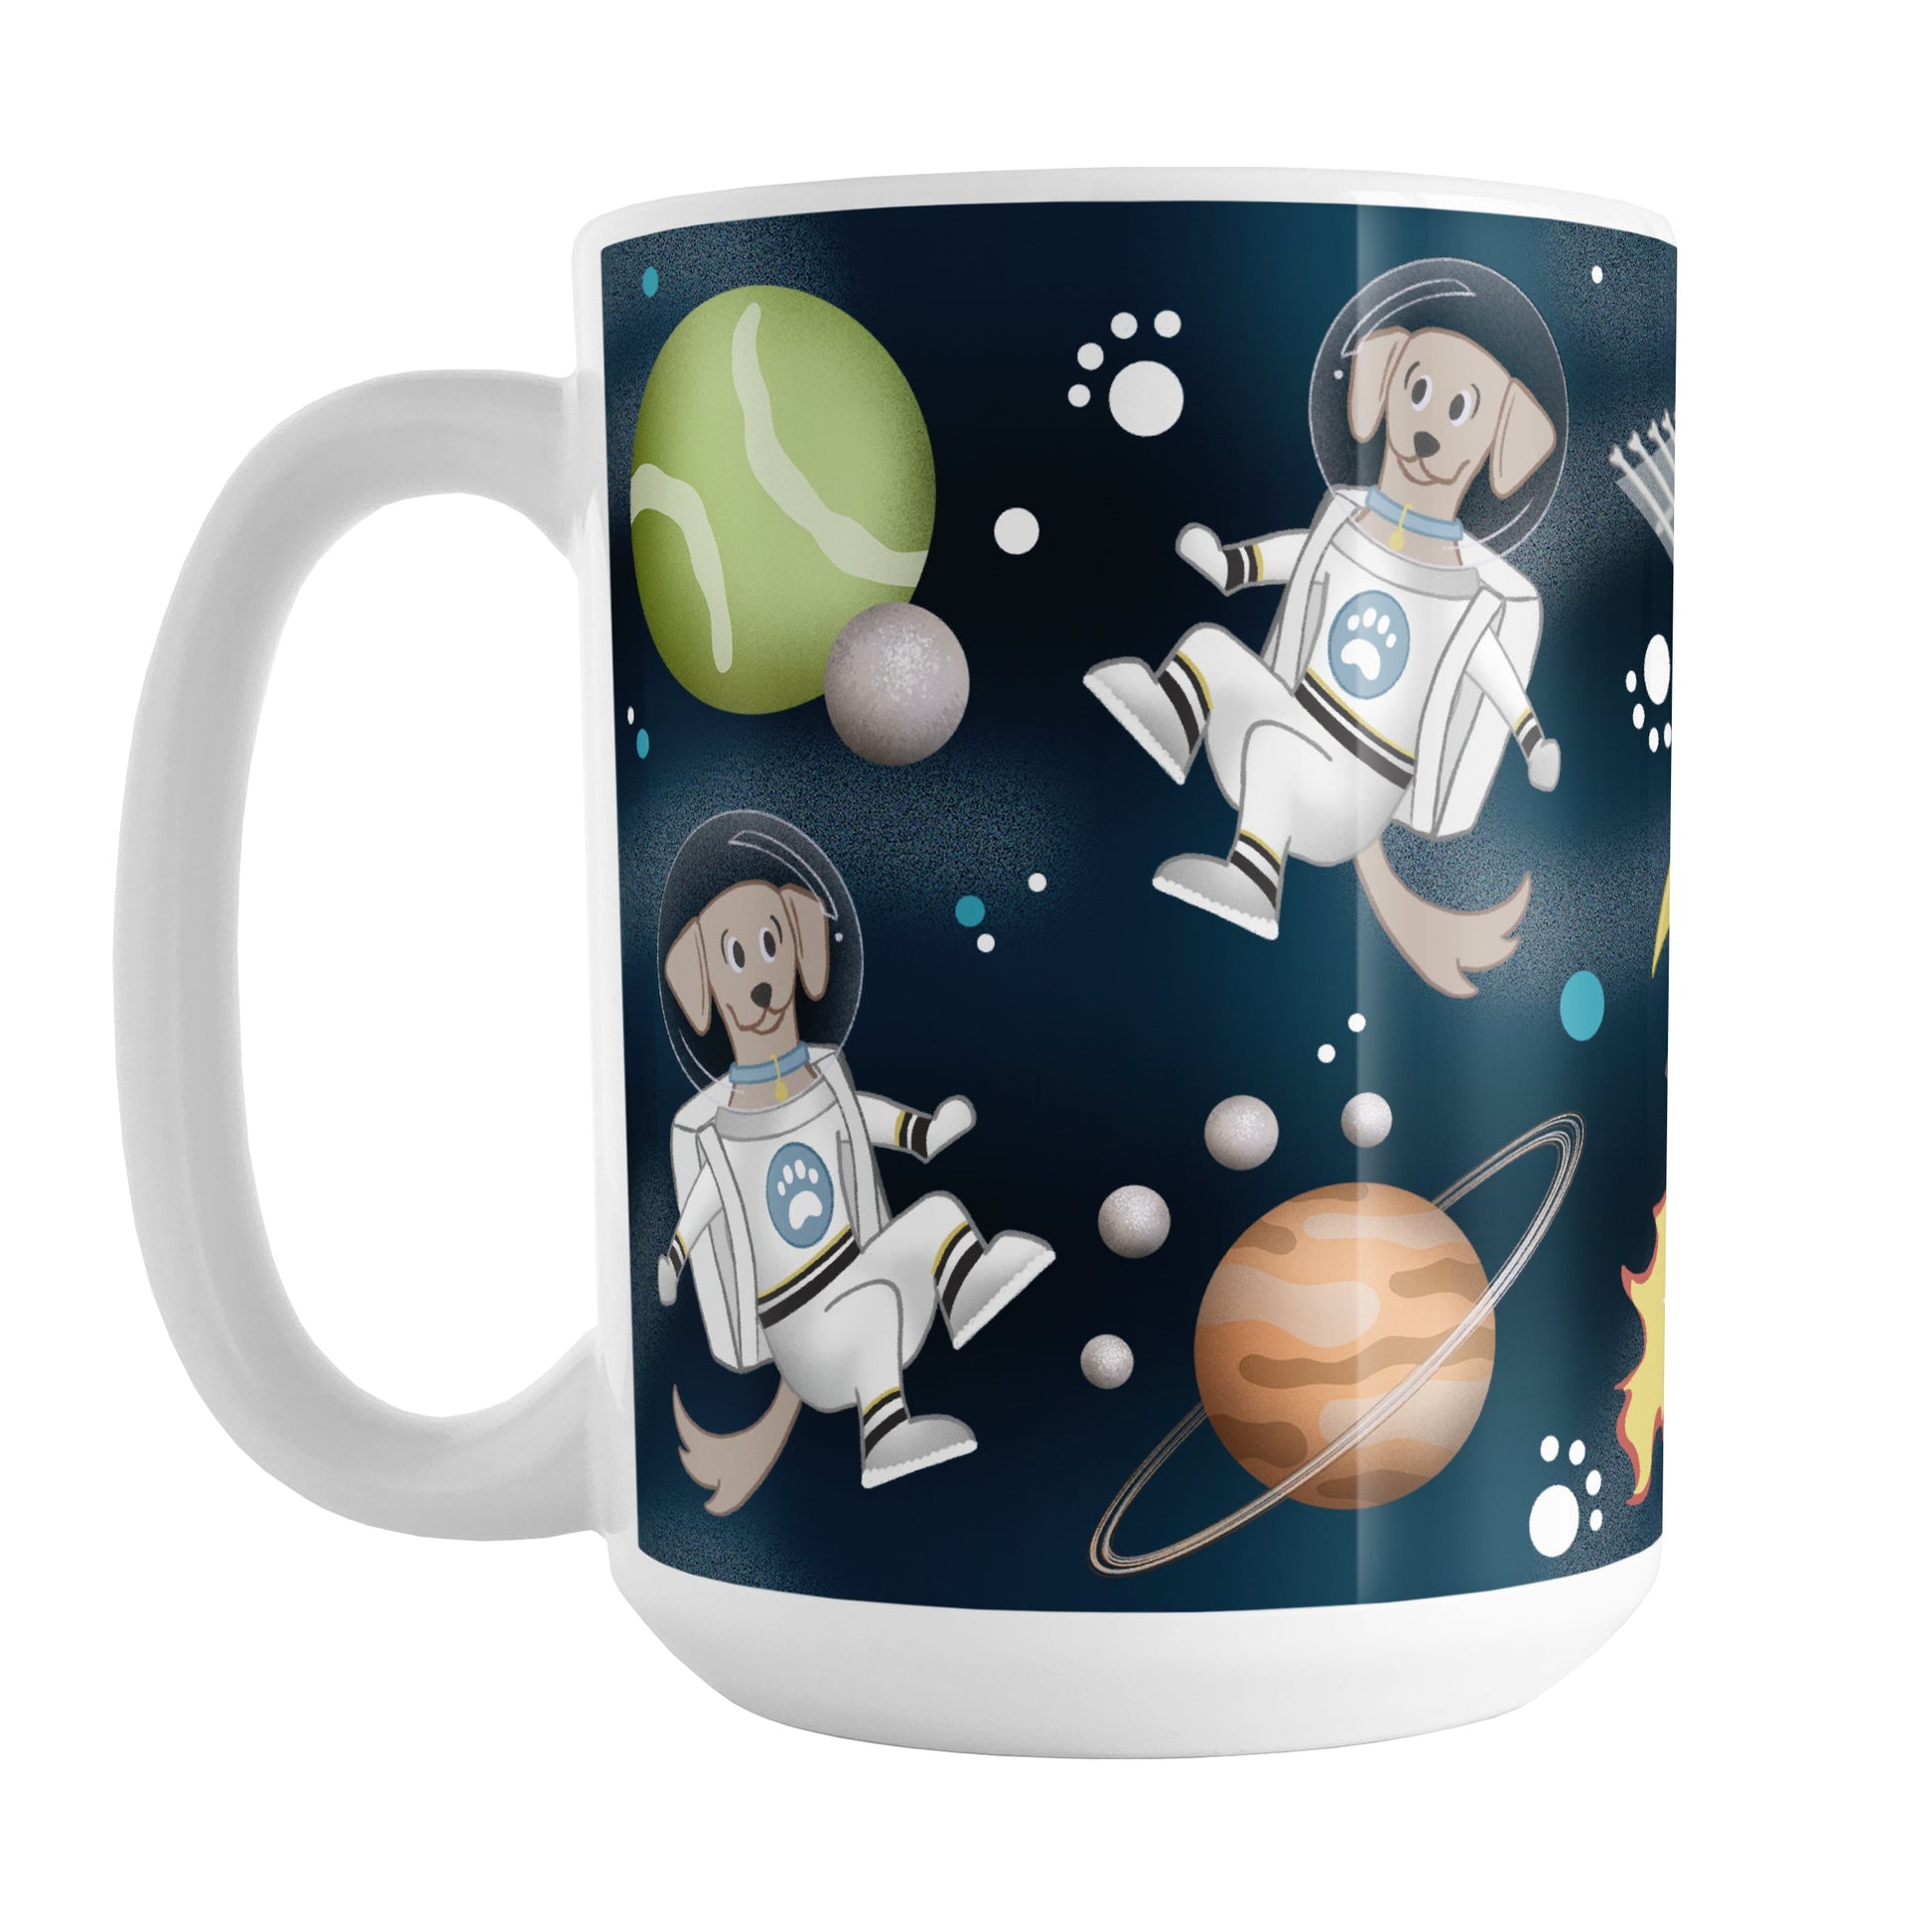 Galaxy Dog-stronaut Mug (15oz) at Amy's Coffee Mugs. A ceramic coffee mug with a fun galaxy "dog-stronaut" design with dog astronauts, dog themed planets, a dog bone satellite, paw print stars, and a dog branded rocket ship on an outer-space background. Perfect for people who love galaxy and space designs, and love dogs too!